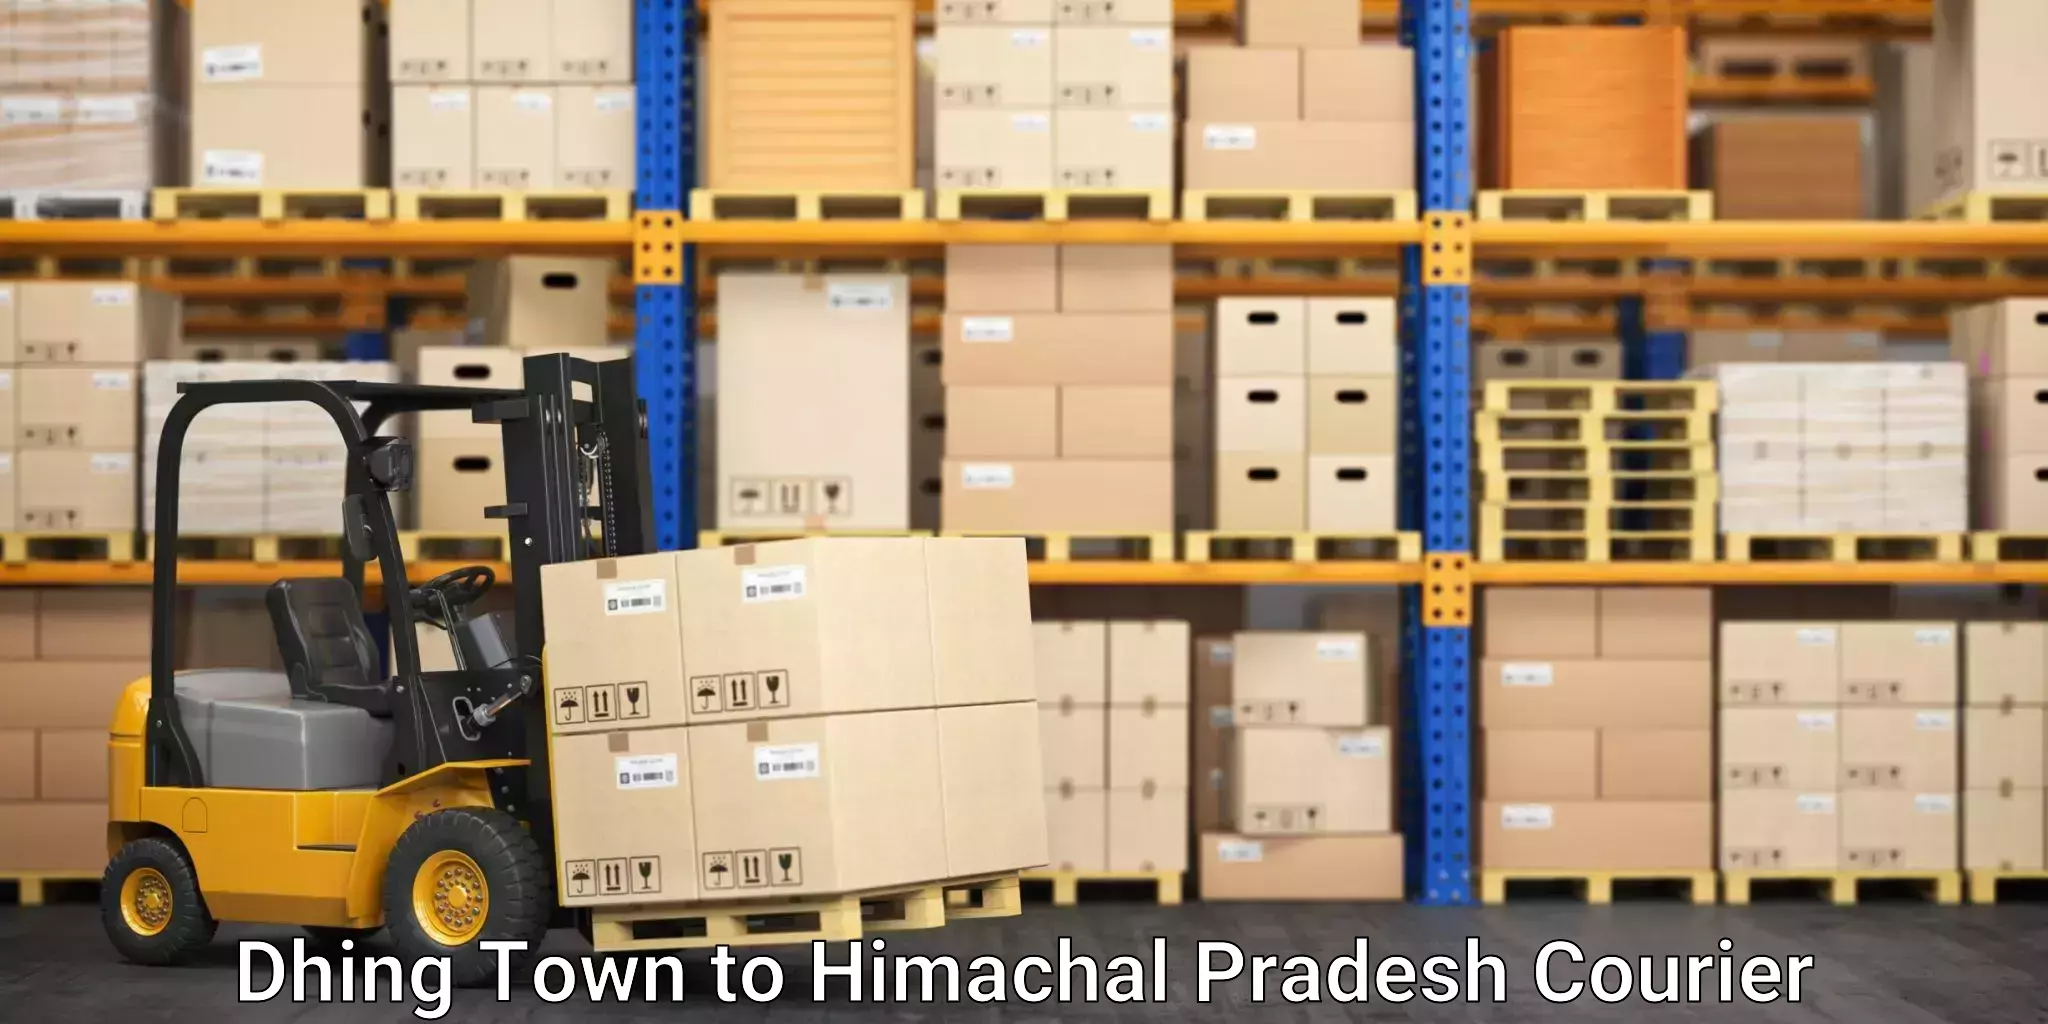 Nationwide courier service in Dhing Town to Una Himachal Pradesh